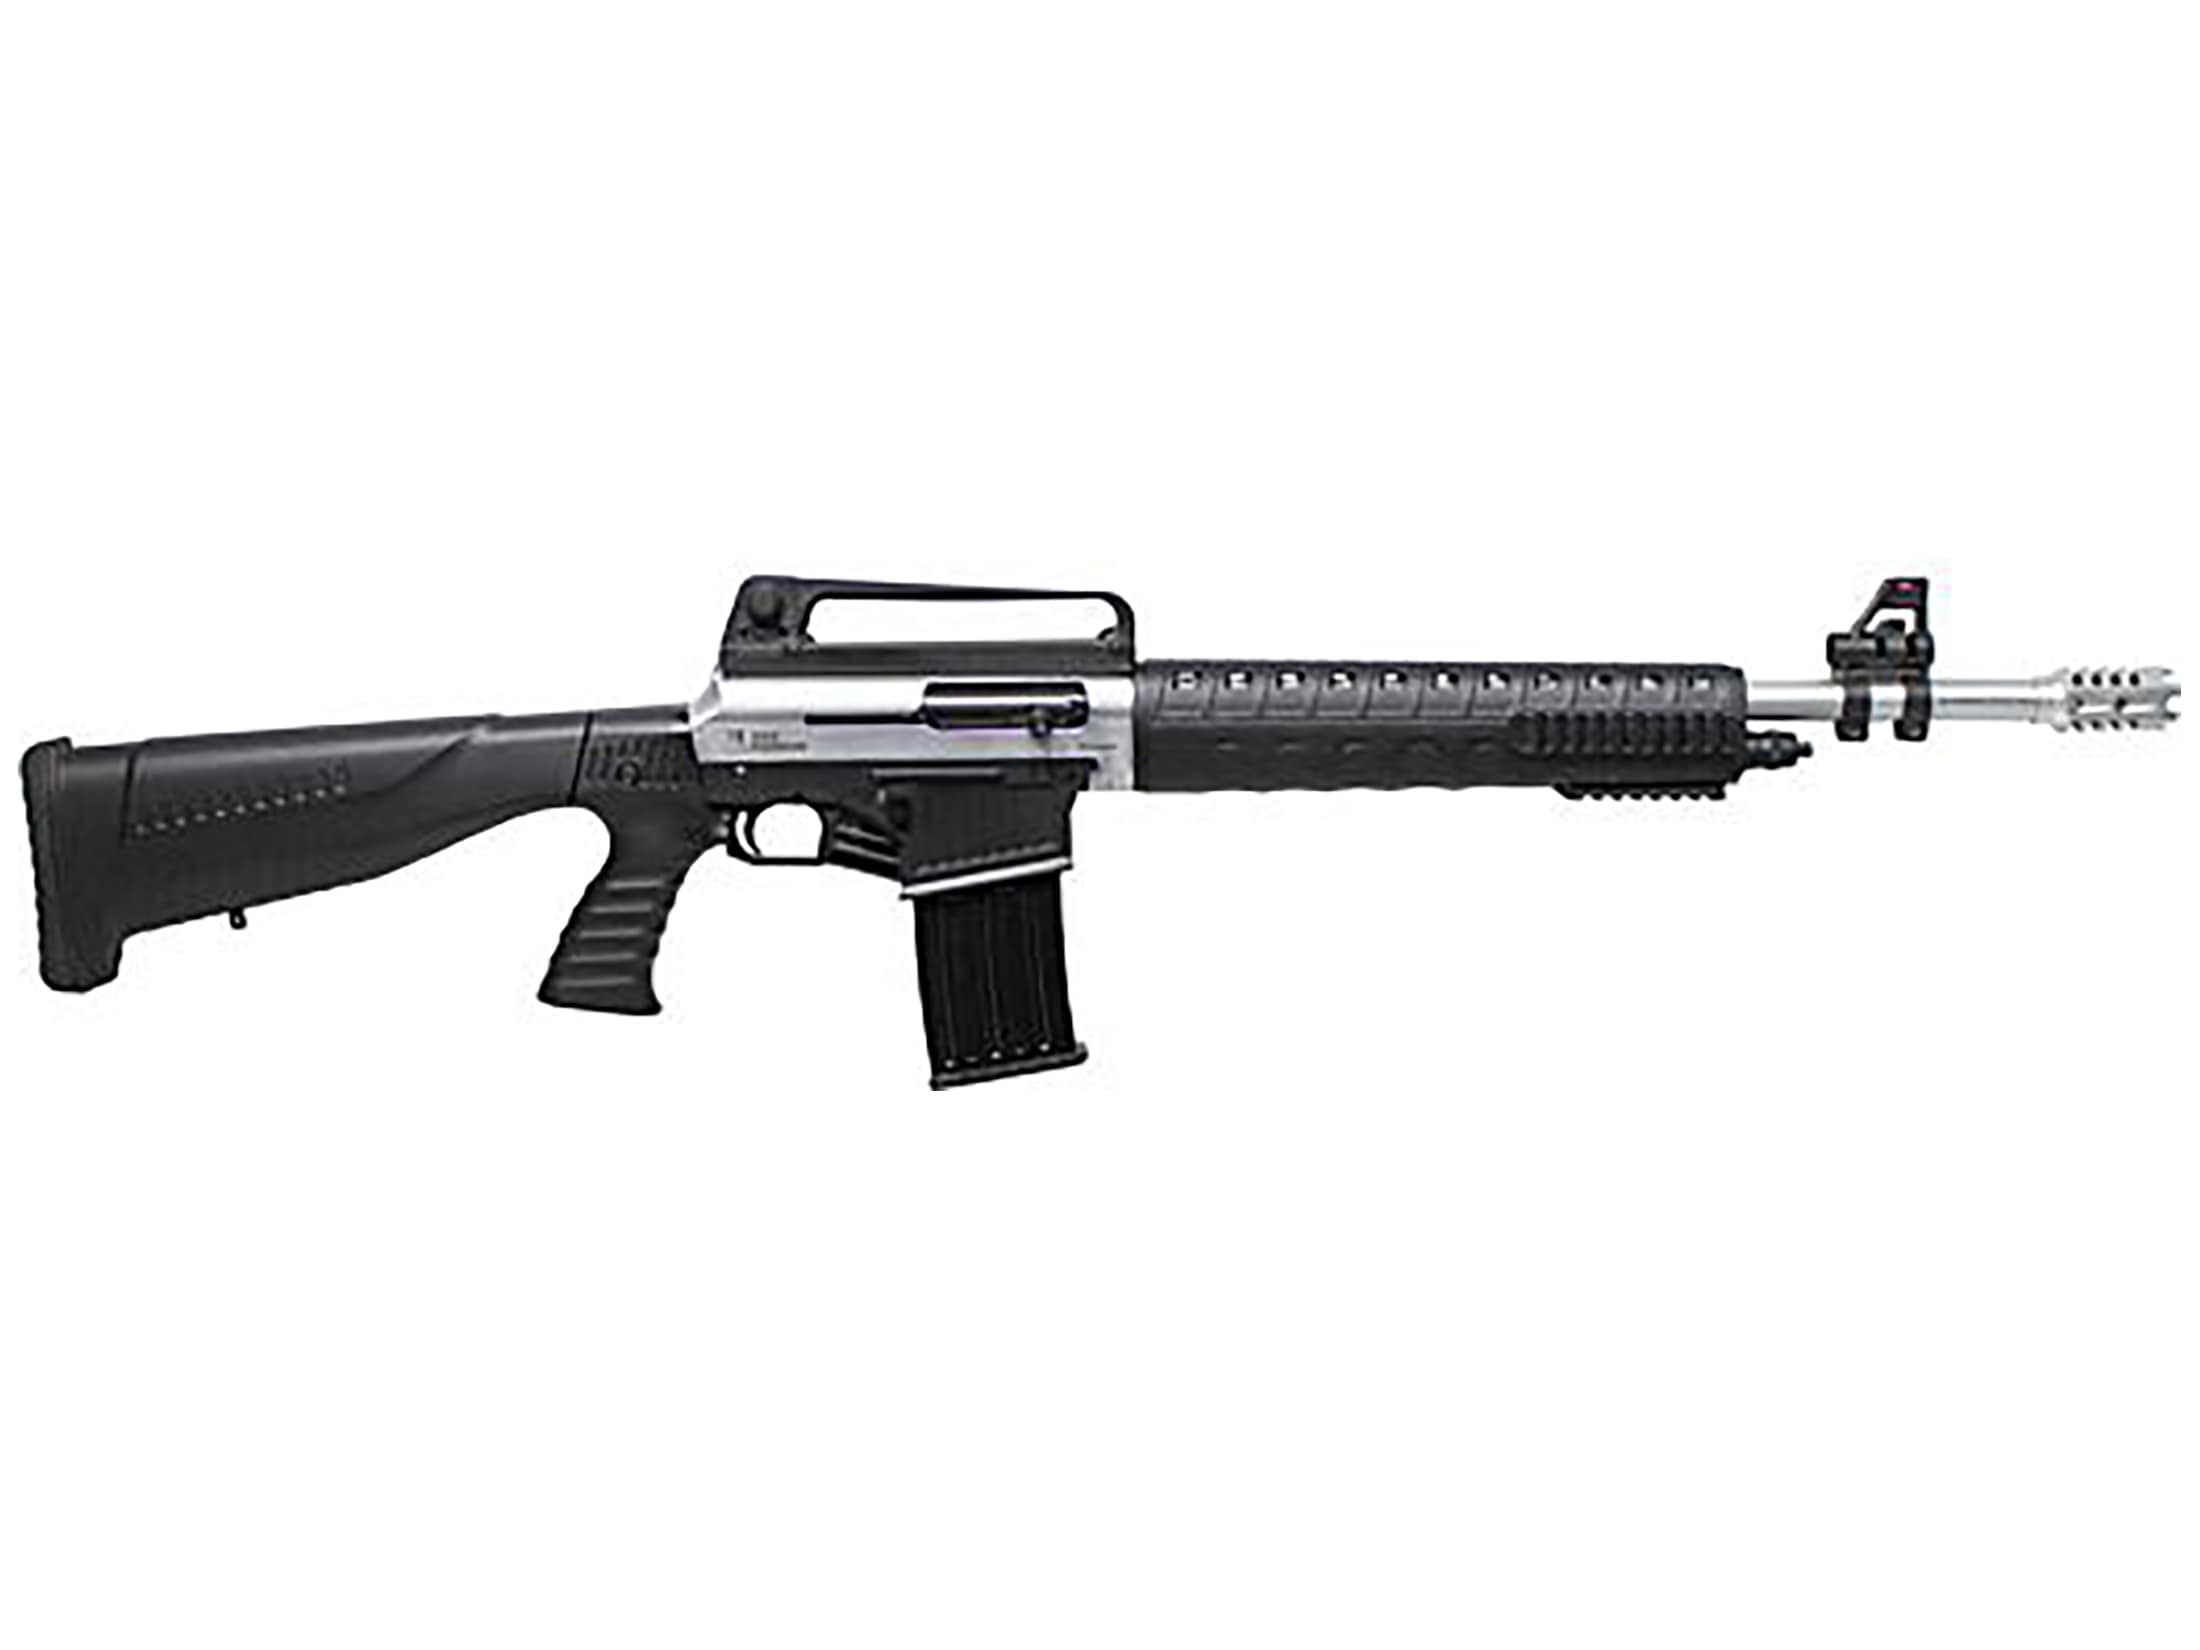 The Iver Johnson Stryker Shotgun is a semi-automatic shotgun with an AR-15 style...